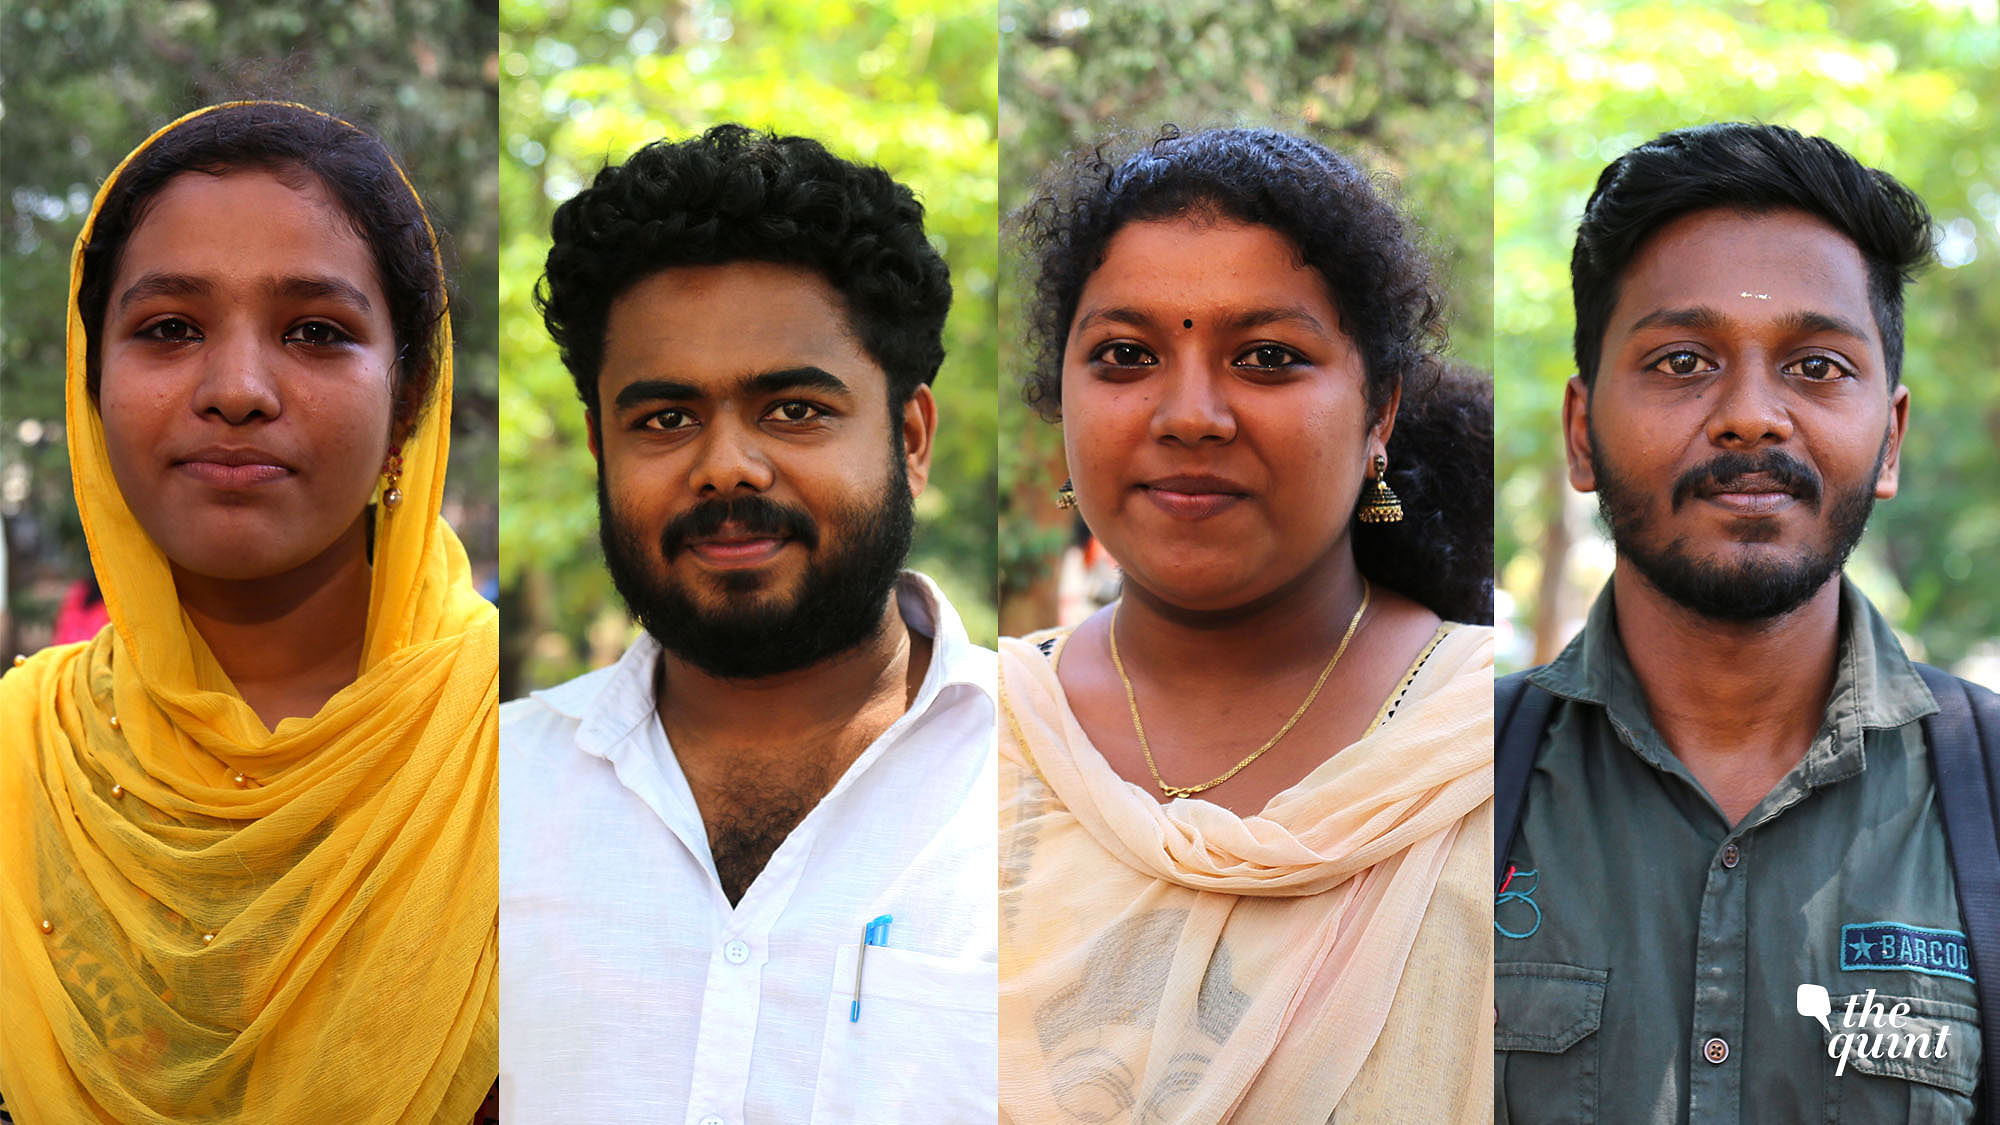 The people of Kerala talk about how they feel about Rahul Gandhi’s nomination from Wayanad for Lok Sabha elections.